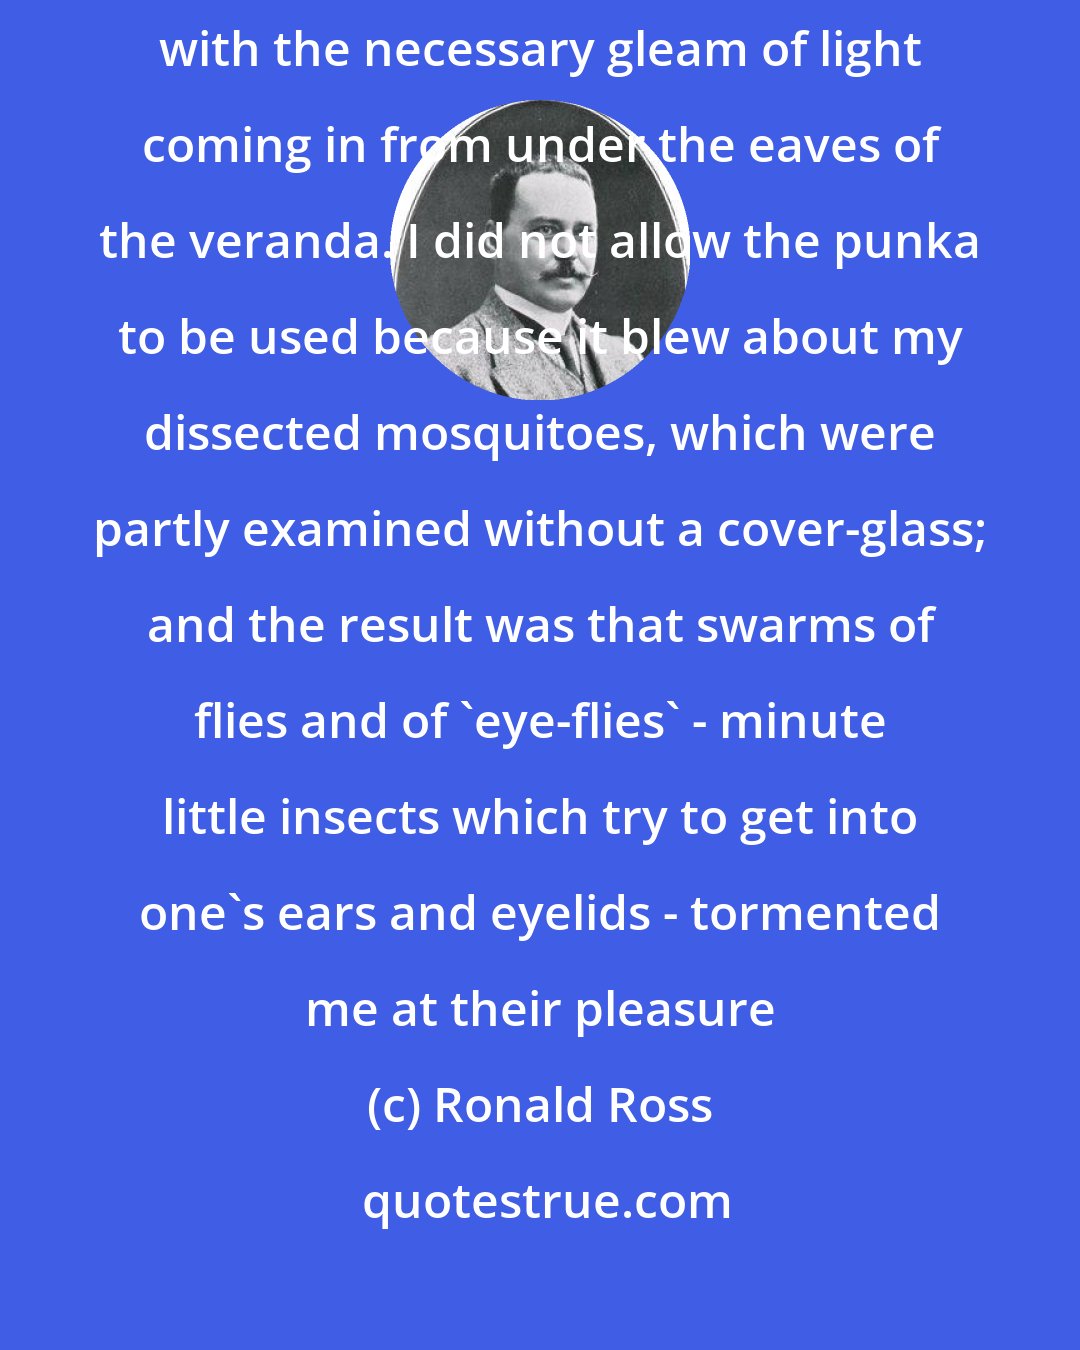 Ronald Ross: Well do I remember that dark hot little office in the hospital at Begumpett, with the necessary gleam of light coming in from under the eaves of the veranda. I did not allow the punka to be used because it blew about my dissected mosquitoes, which were partly examined without a cover-glass; and the result was that swarms of flies and of 'eye-flies' - minute little insects which try to get into one's ears and eyelids - tormented me at their pleasure